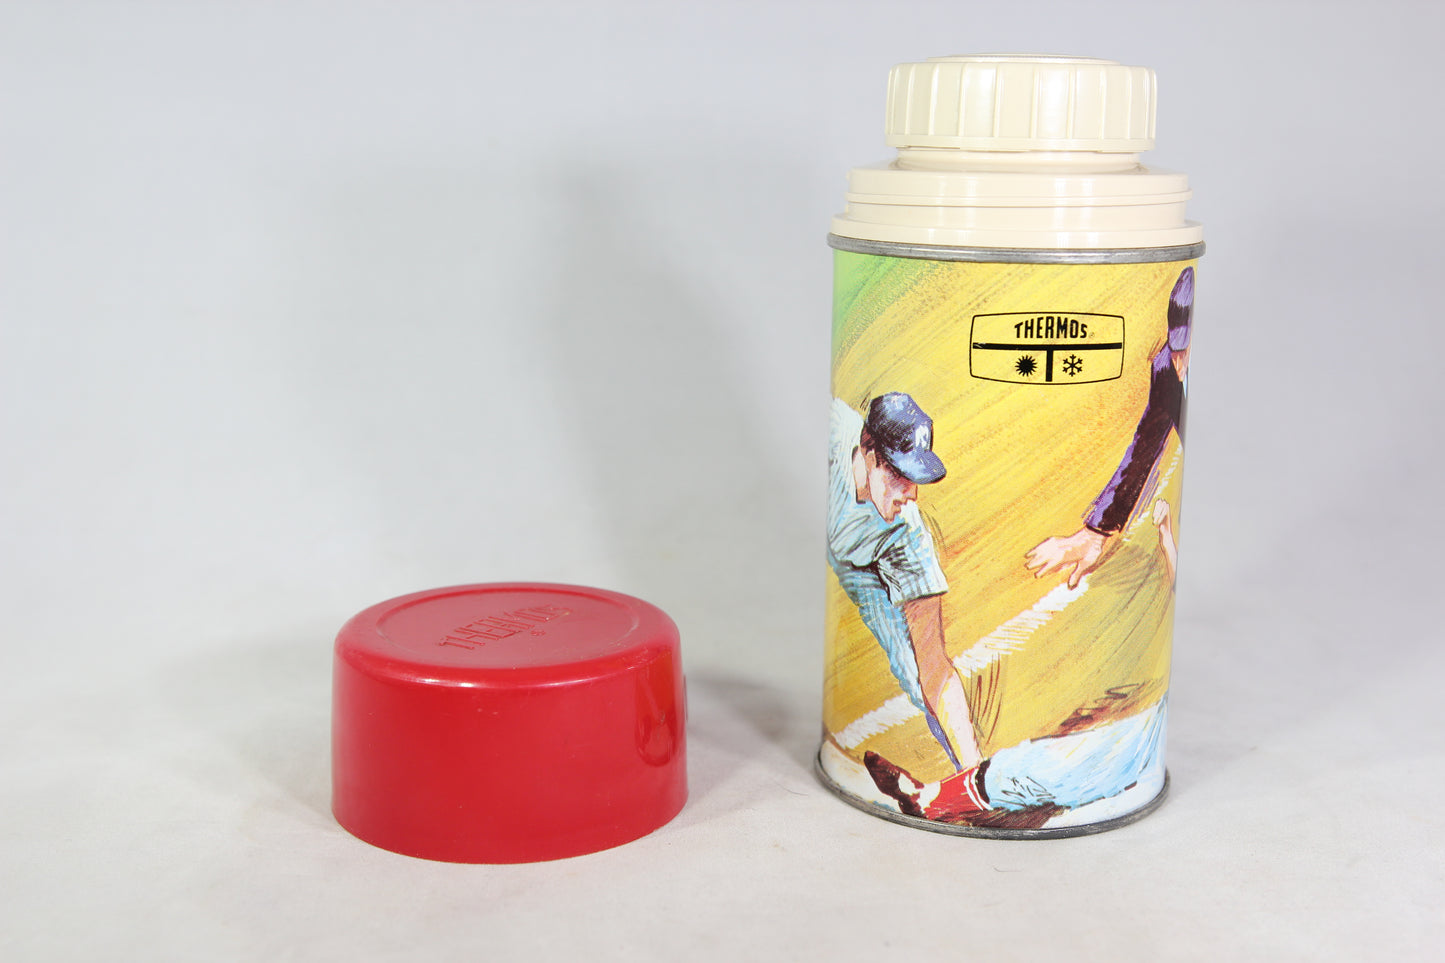 Play Ball Magnetic Game Lunch Kit Thermos Brand Metal Lunchbox, 1969 (With Thermos!)